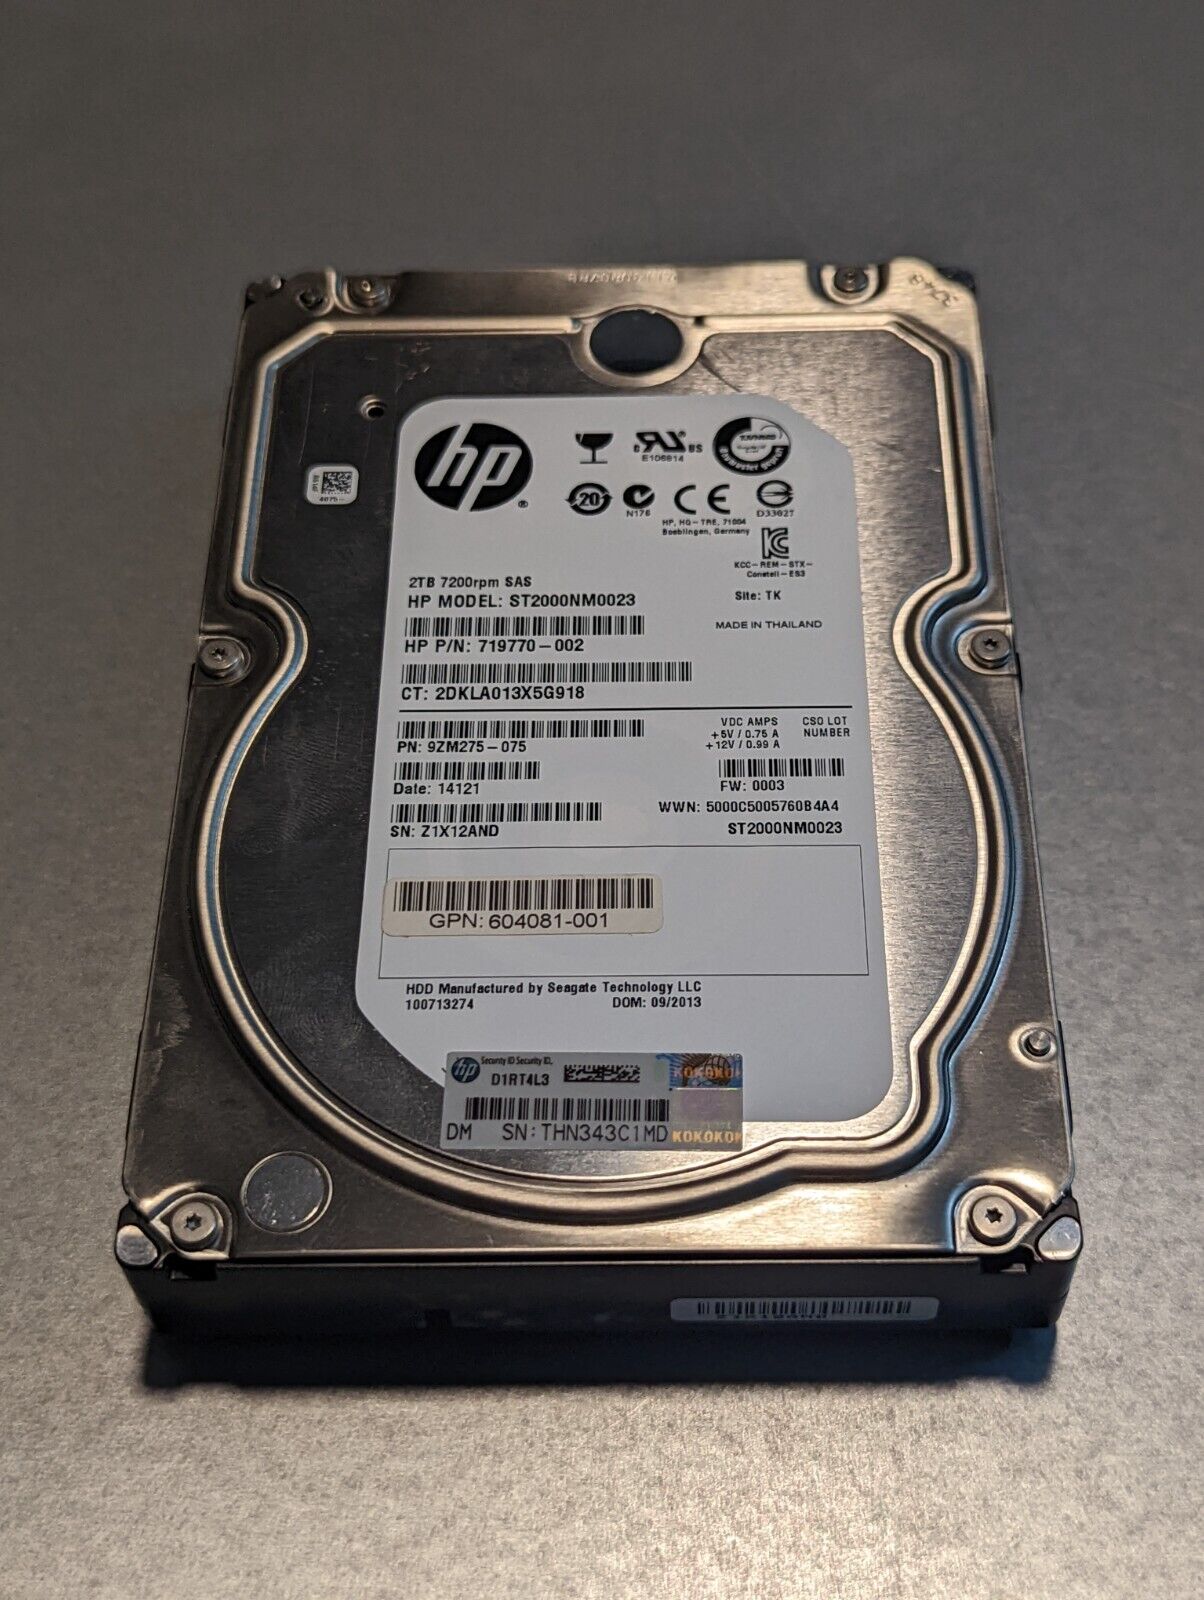 HP Seagate Constellation ES.3 2TB 7200RPM SAS HDD - Formatted, Ready to go